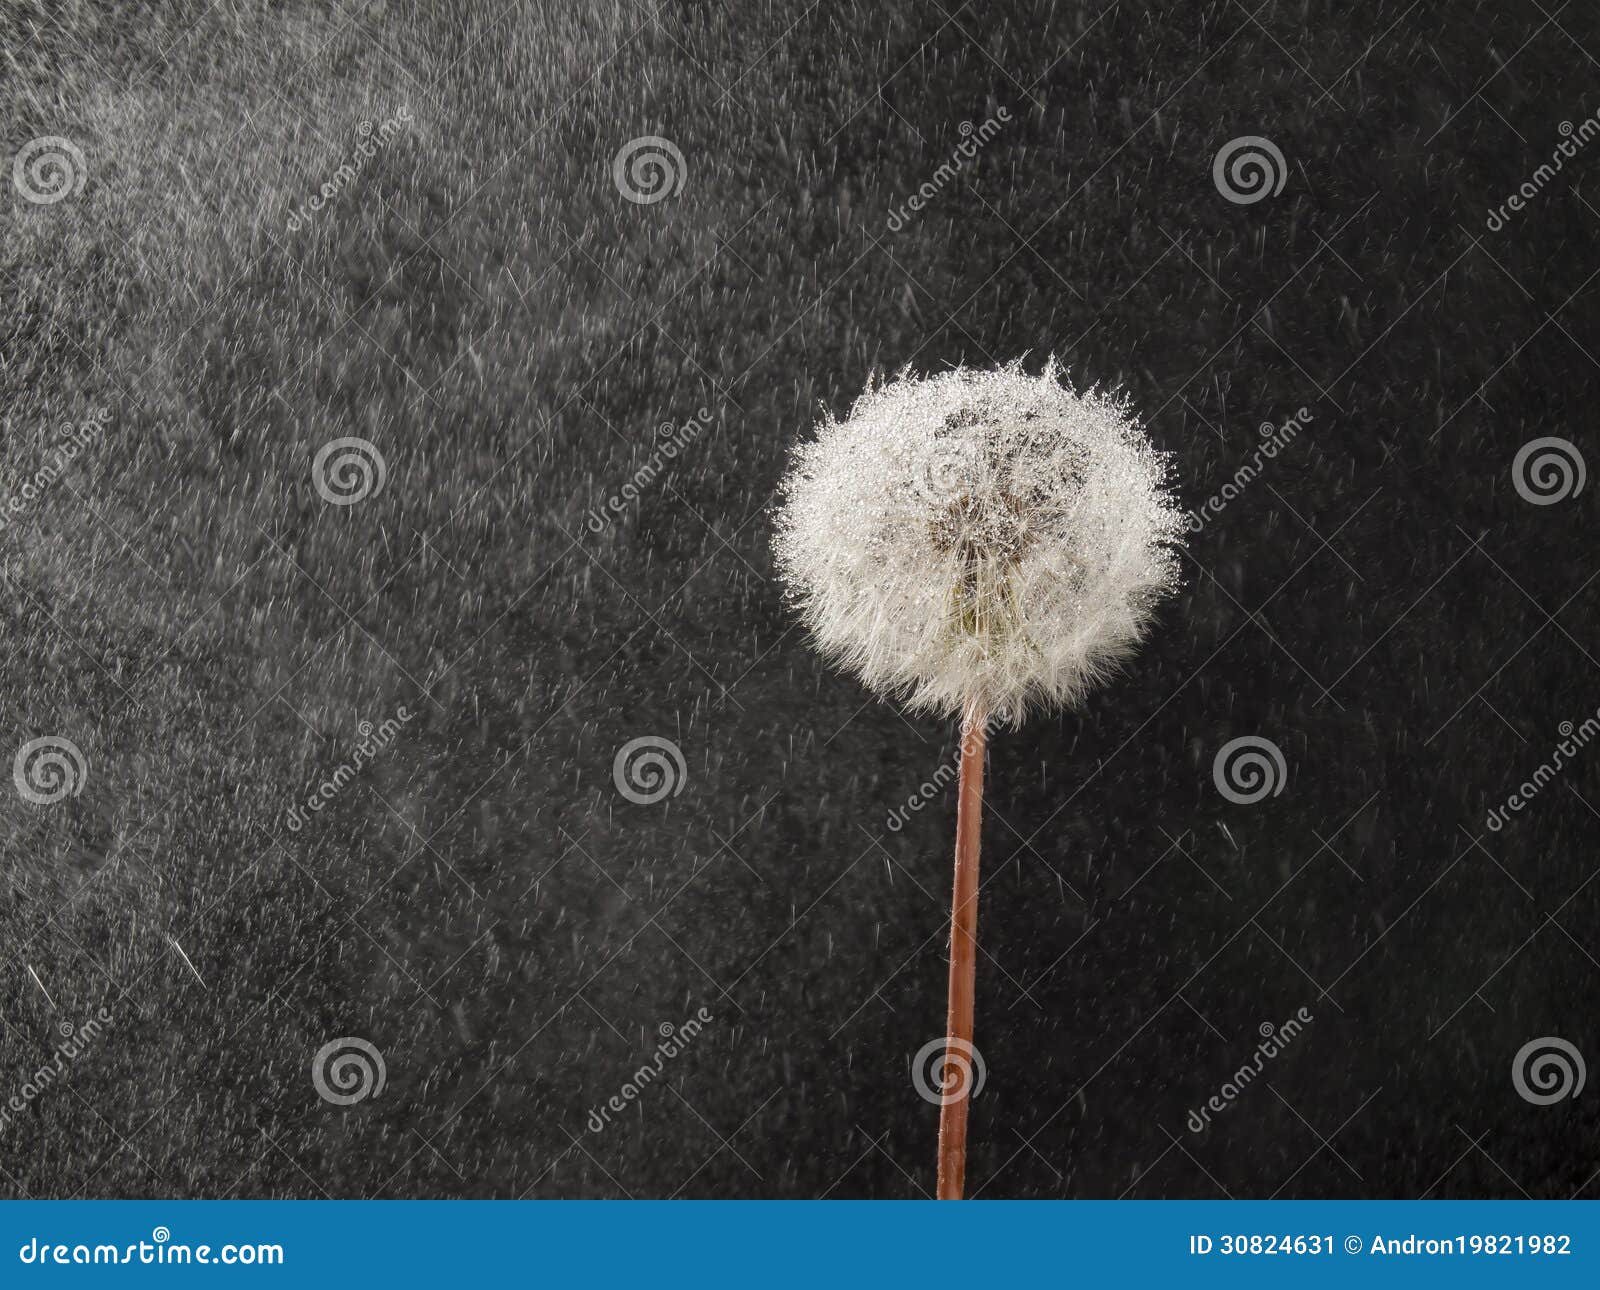 dandelion-in-the-rain-stock-image-image-of-lonely-cost-30824631